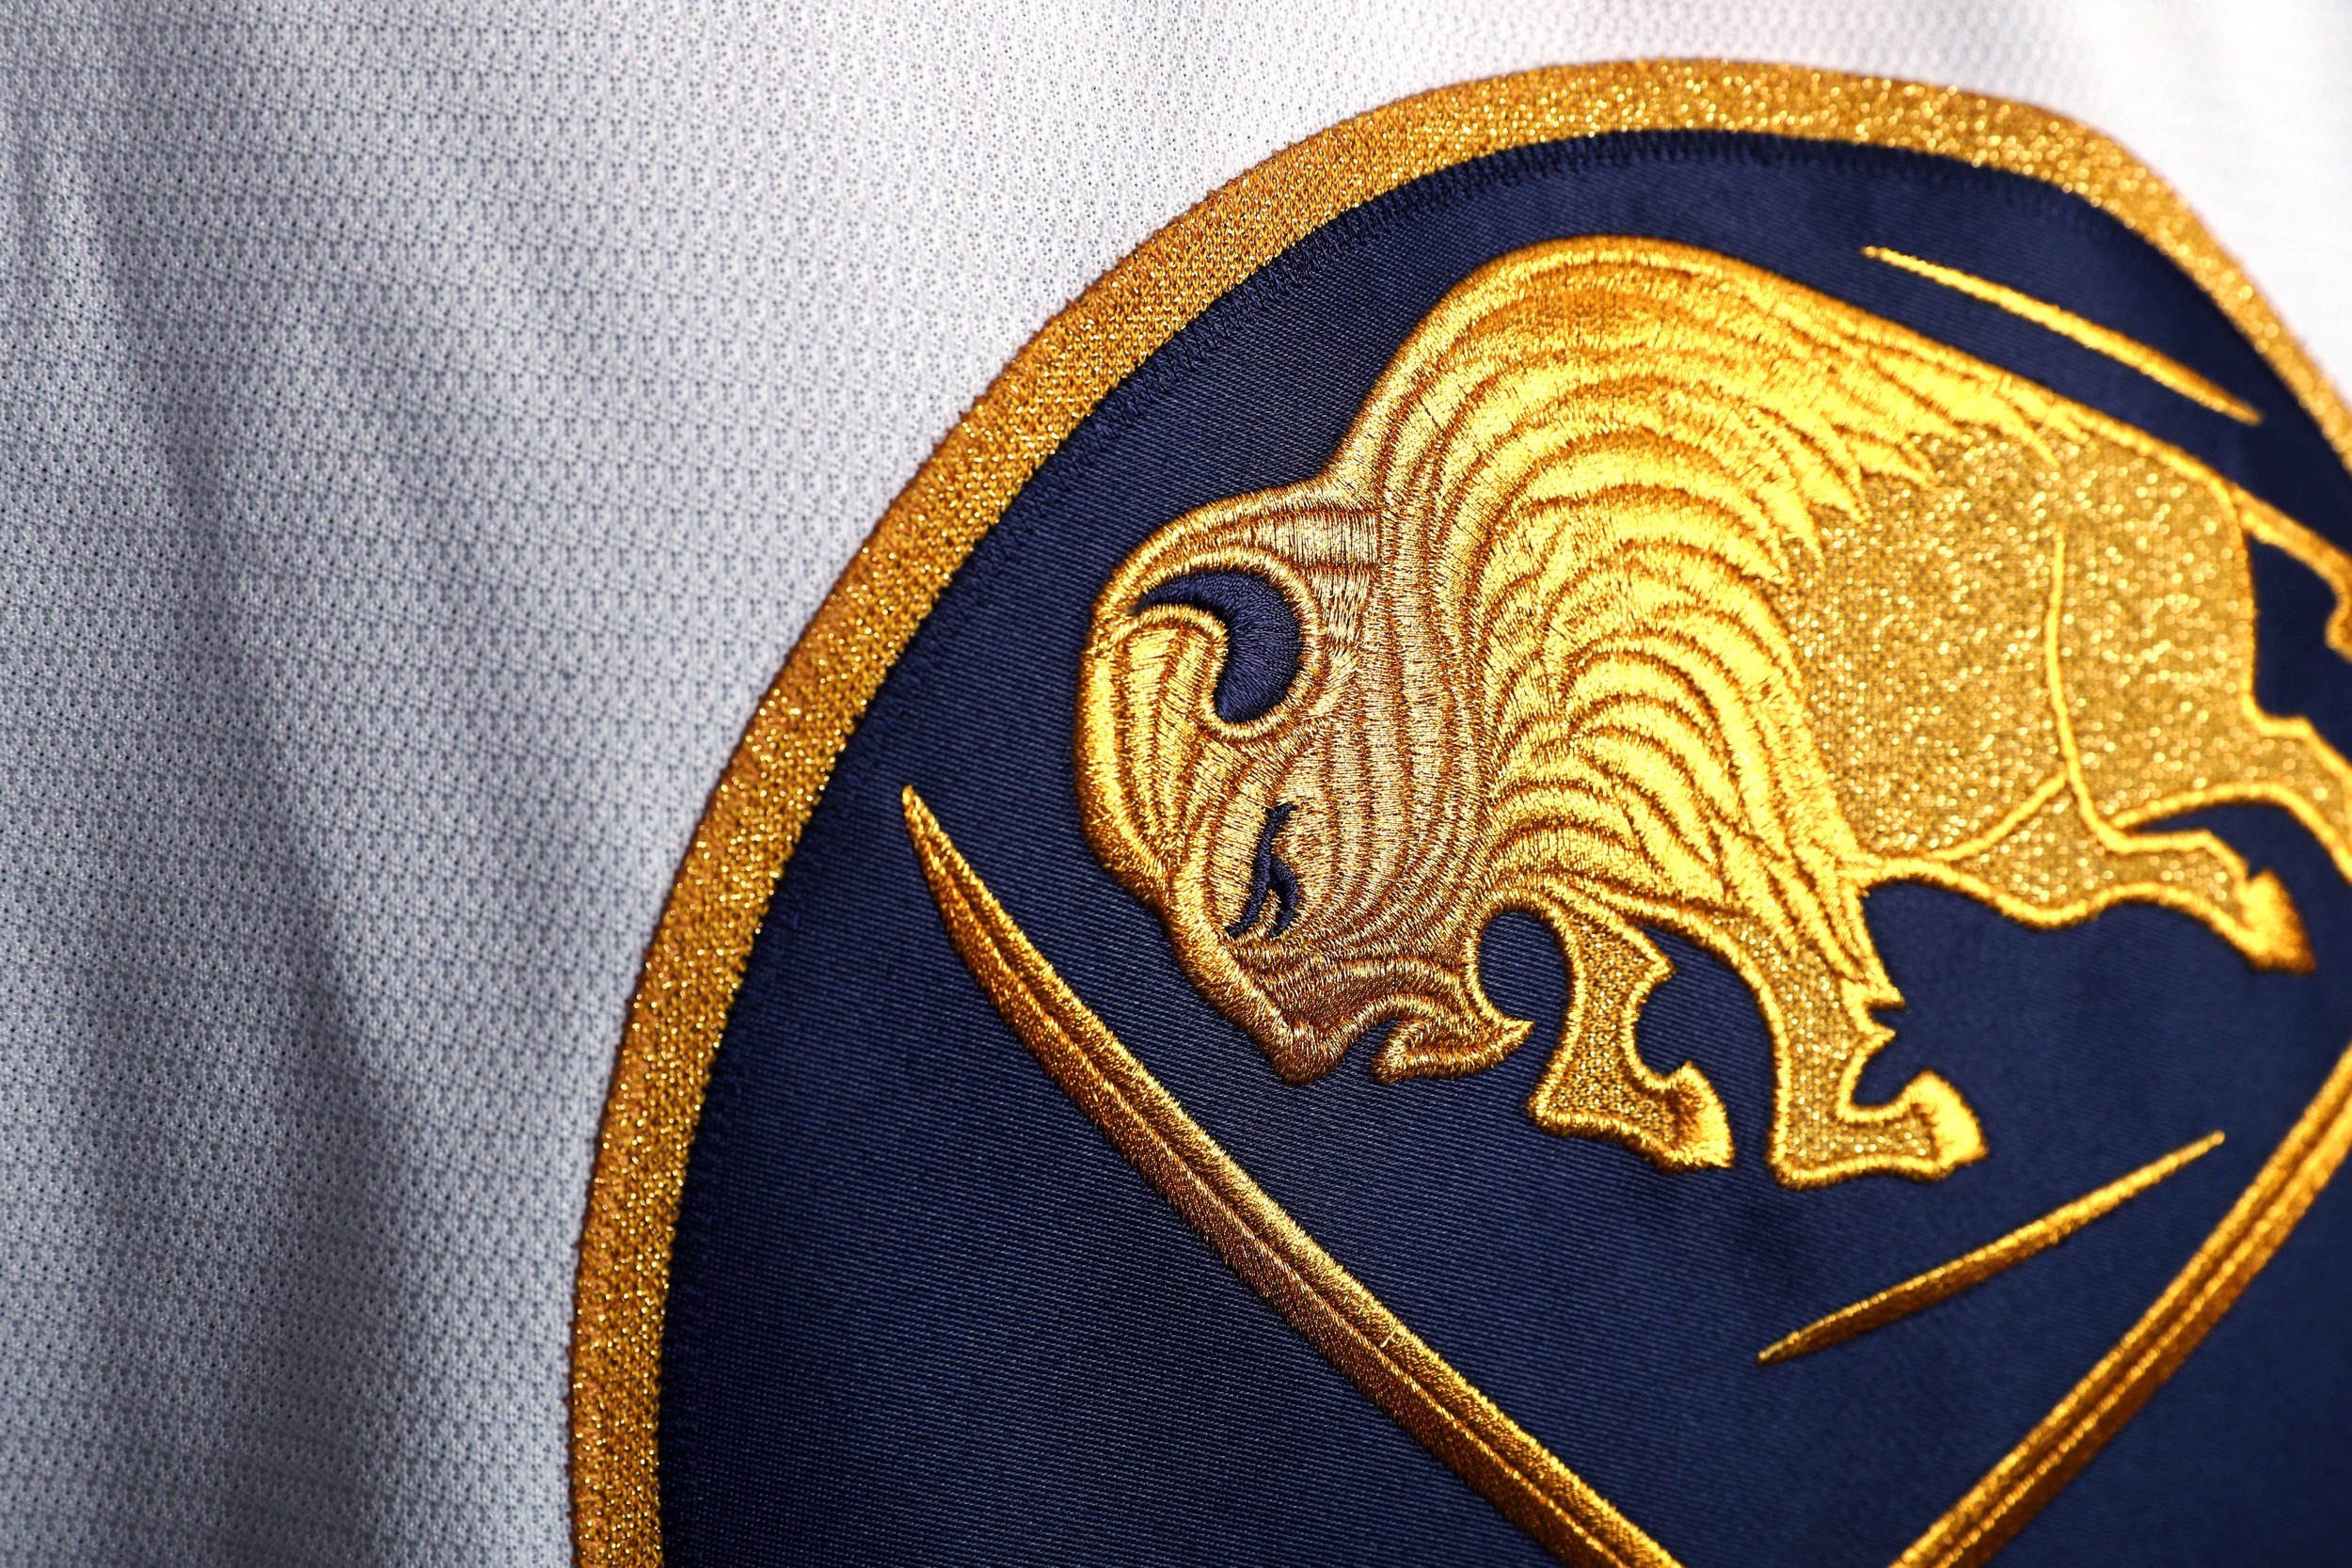 Will the Buffalo Sabres' new alternate jersey be gold? 